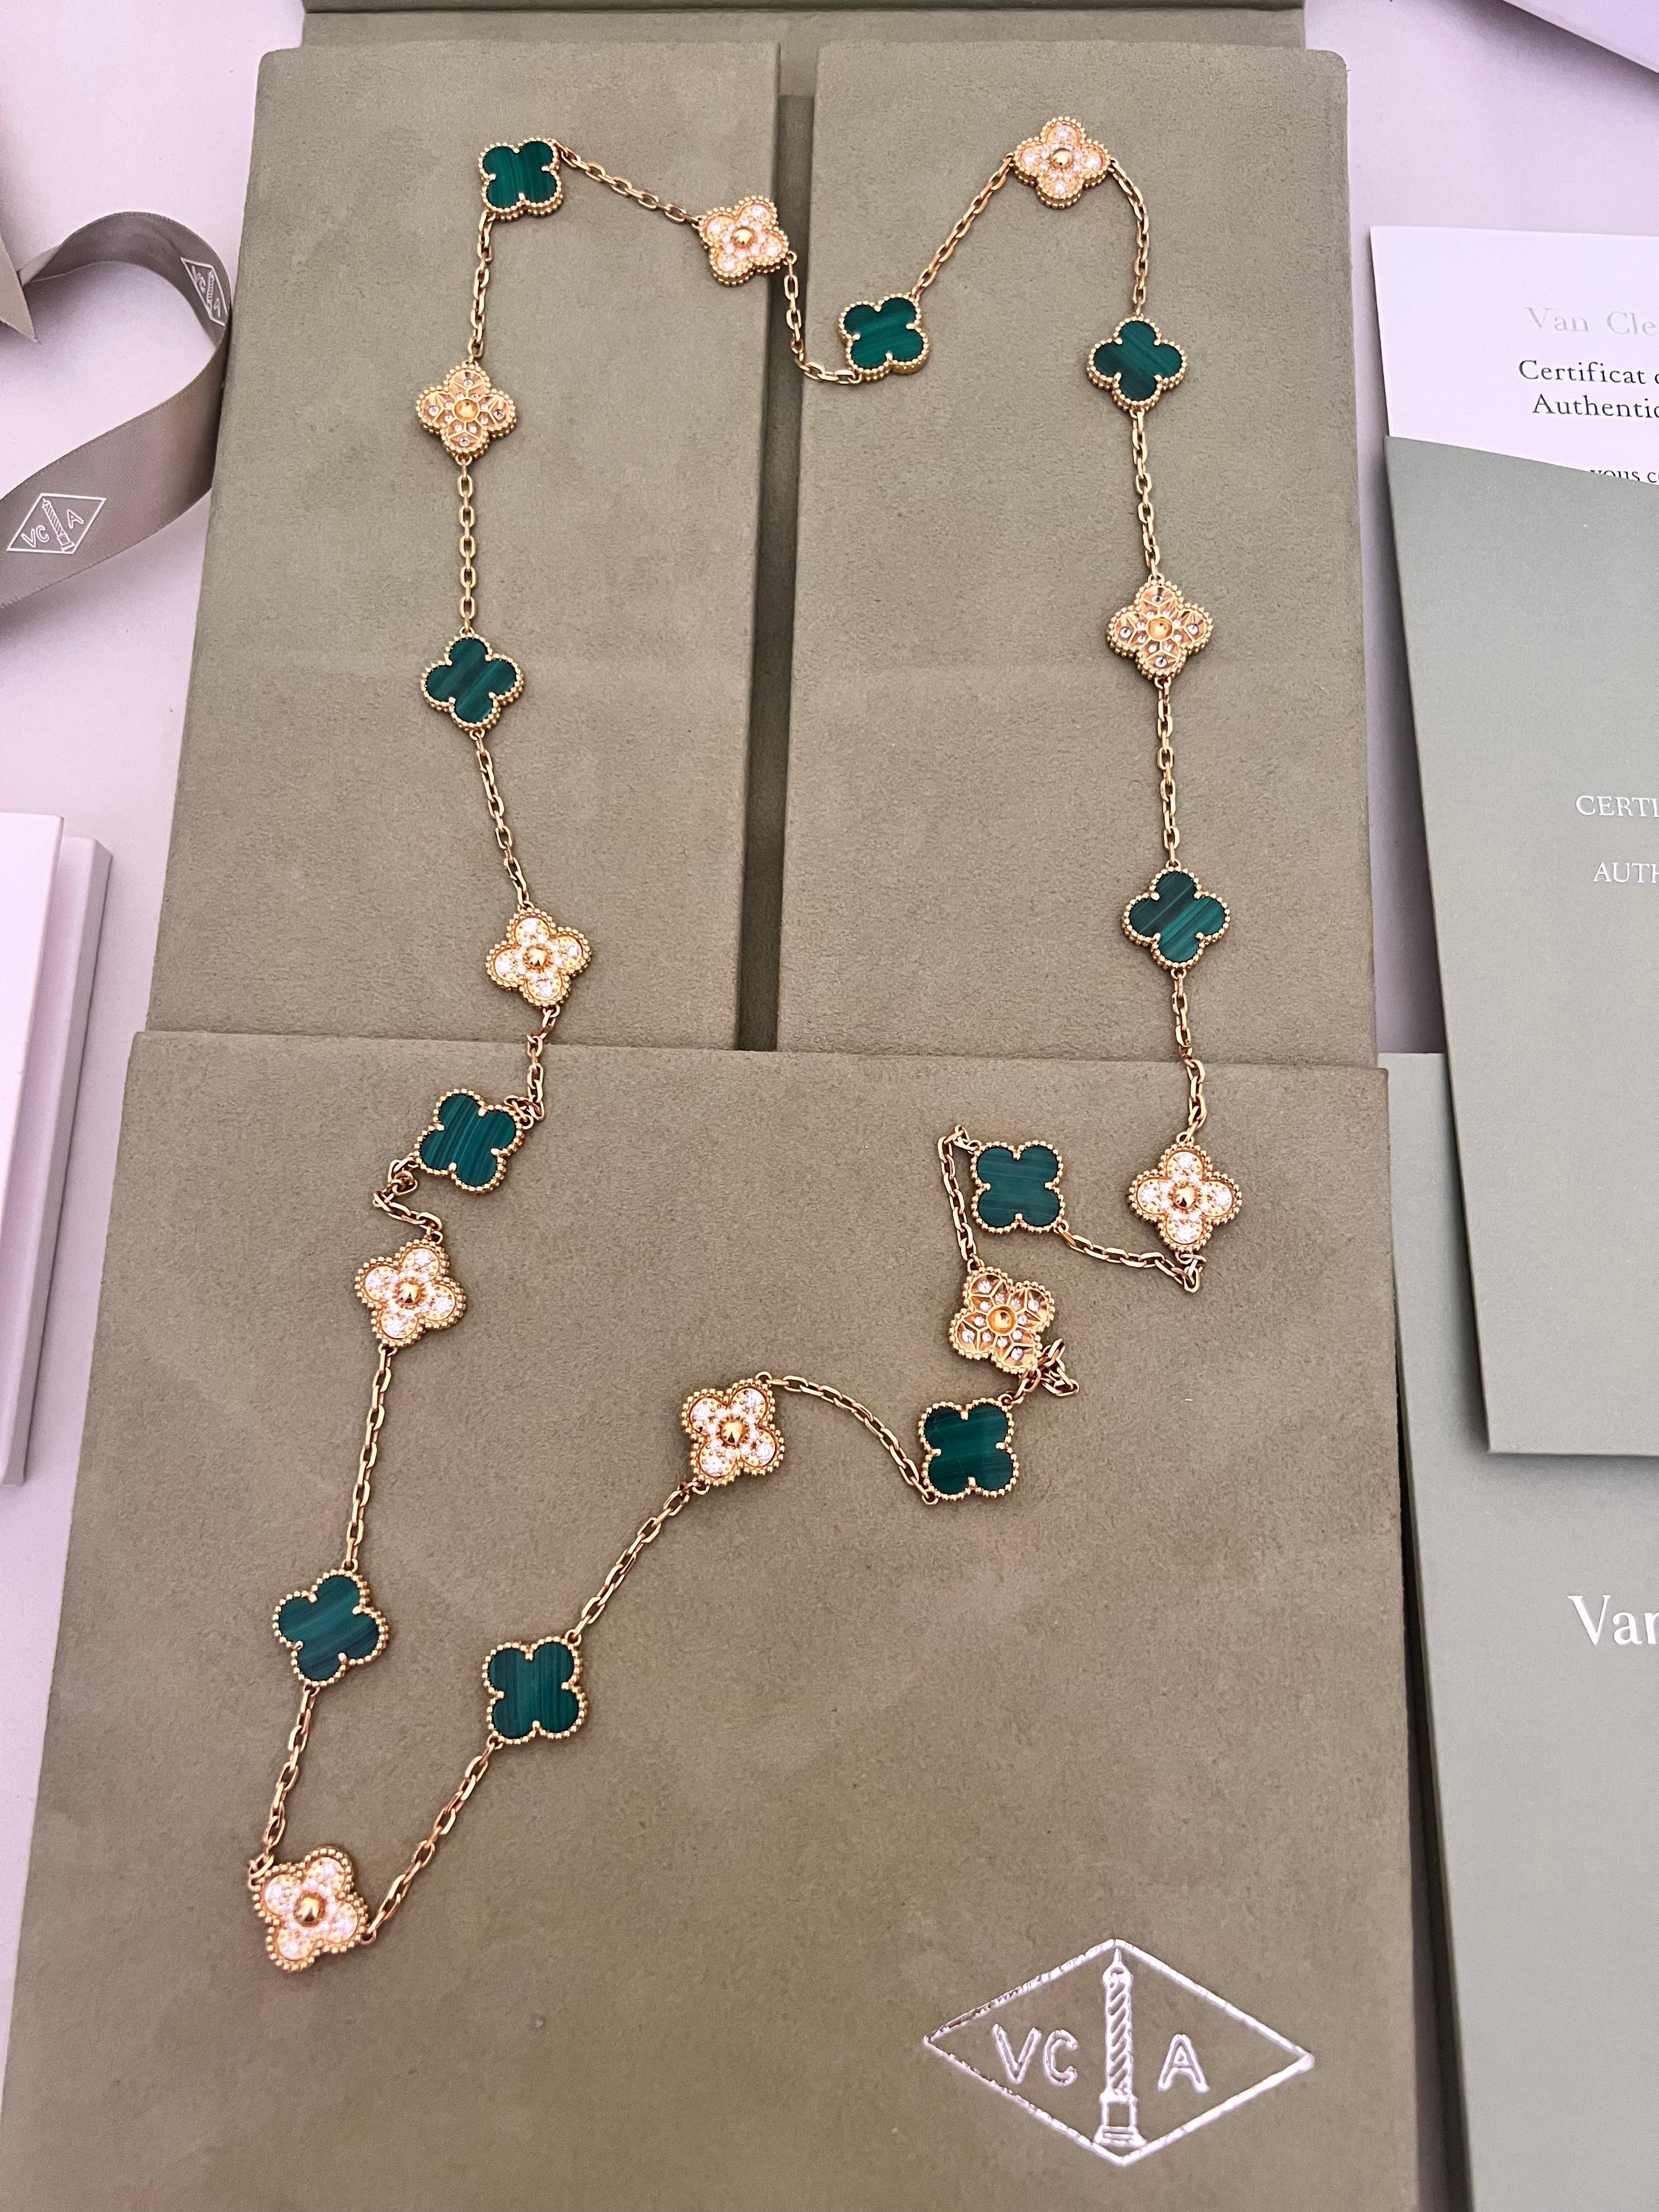 Van Cleef & Arpels Vintage Alhambra  20 Malachite Gold and Diamonds  Necklace For Sale 4